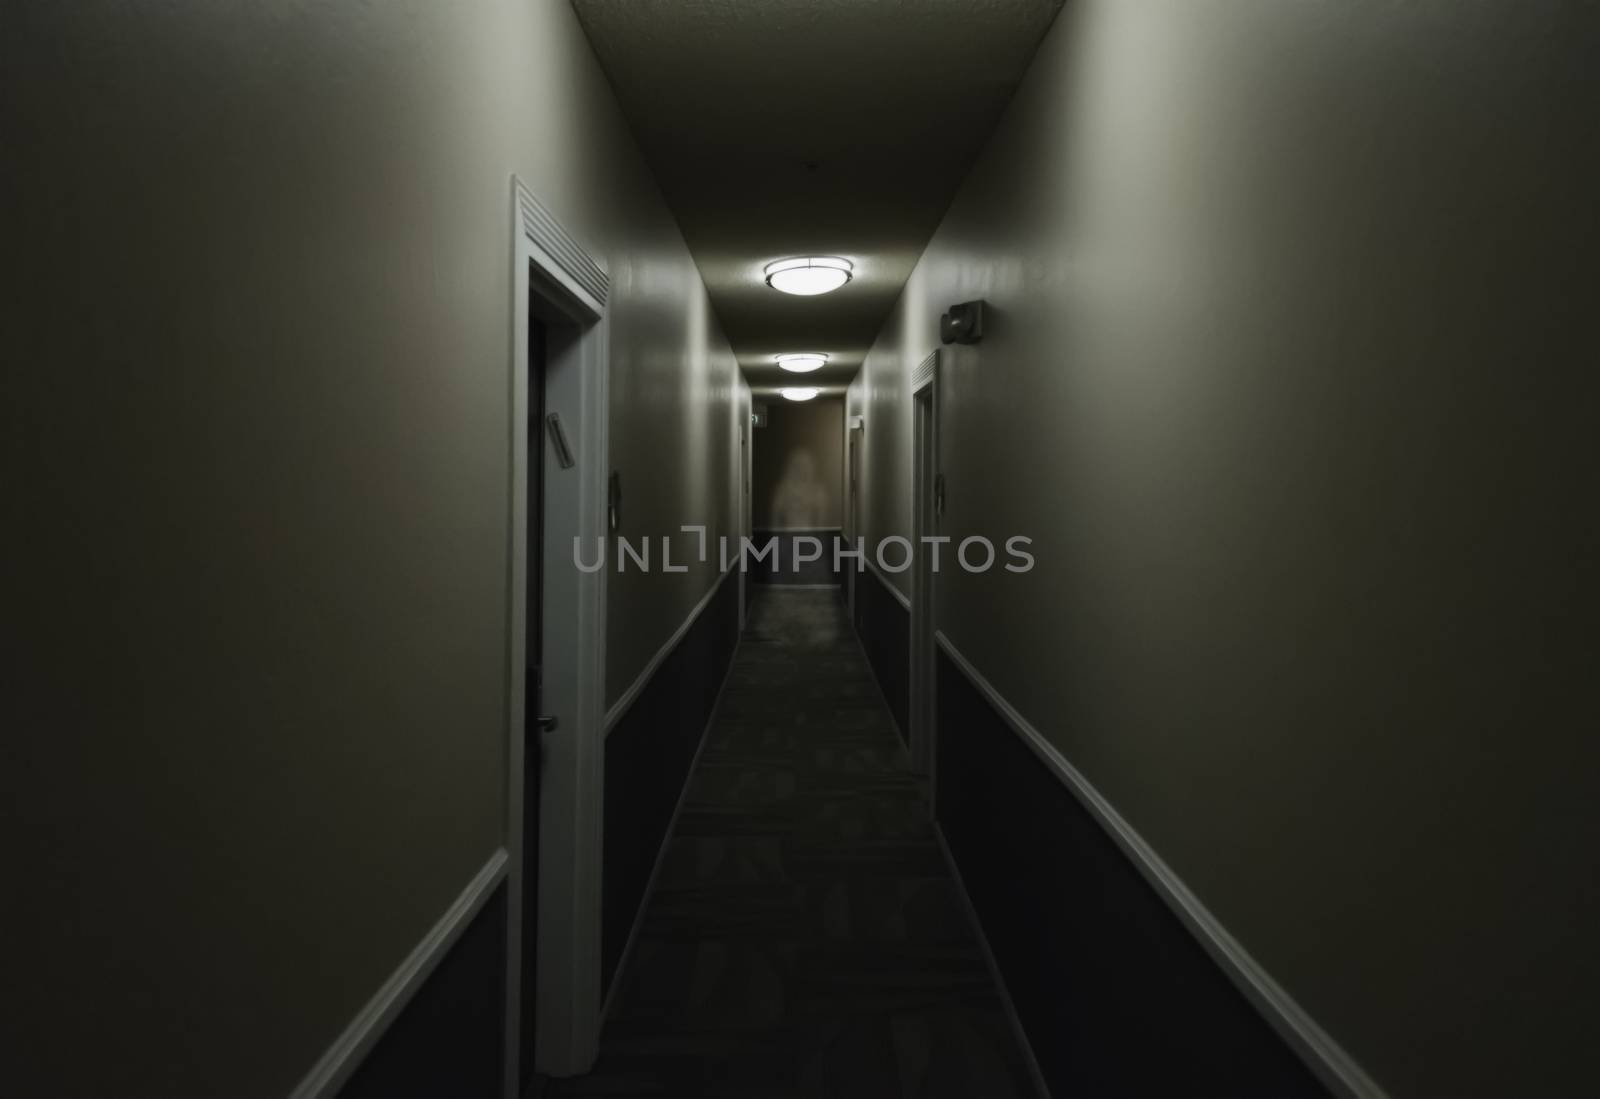 Artistic vision of a ghost of a woman standing in a hallway.